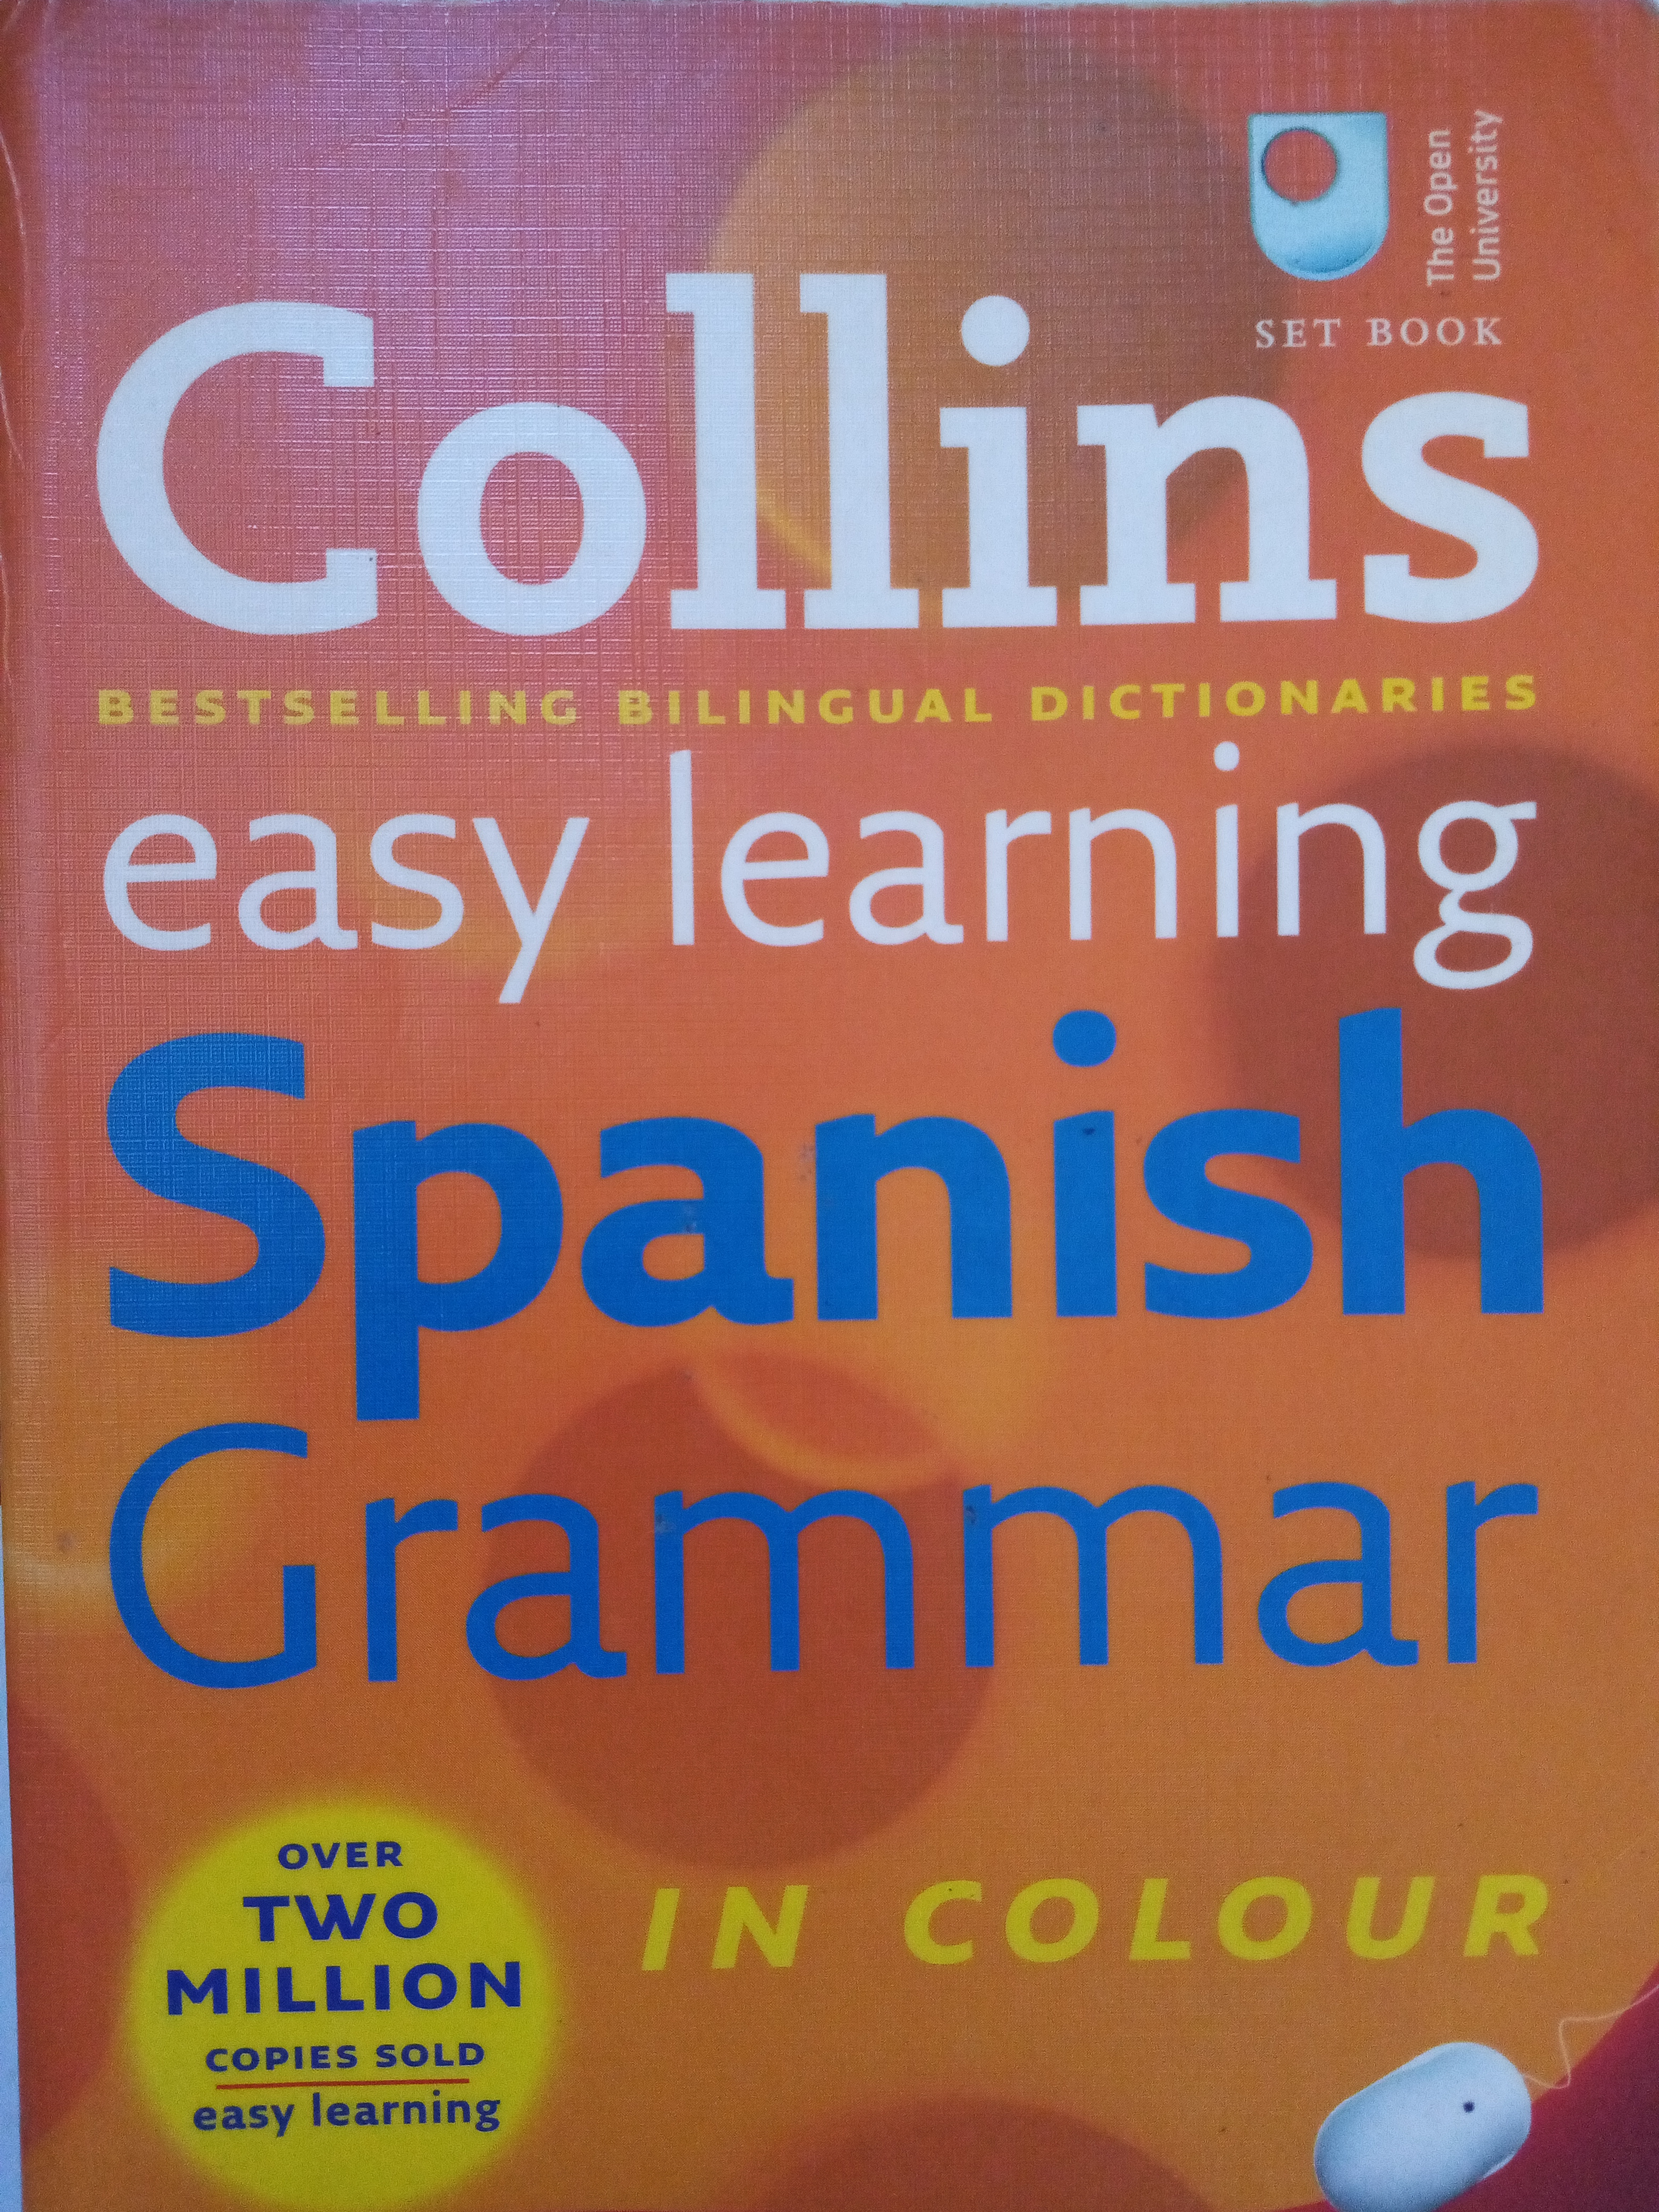 Collins Easy Learning Spanish Grammar; Collins-Dictionary, Cordelia Lilly; 2005